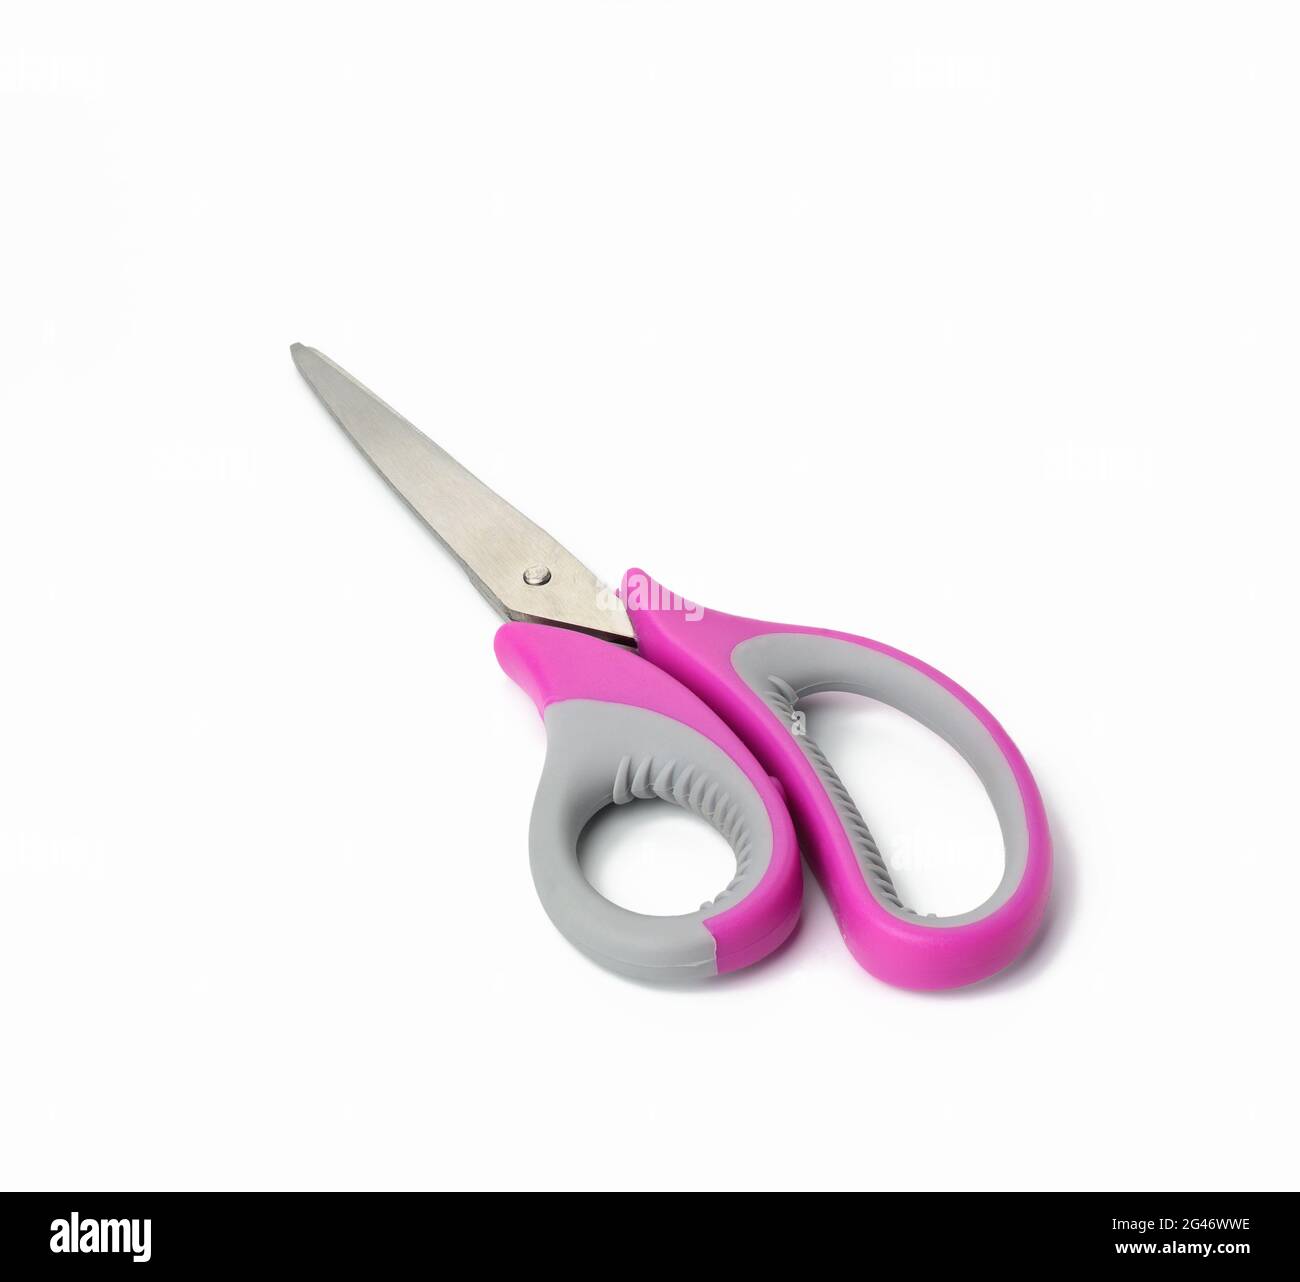 Cute Pink Pastel Scissors Cutter in Watercolor Style Stock Photo